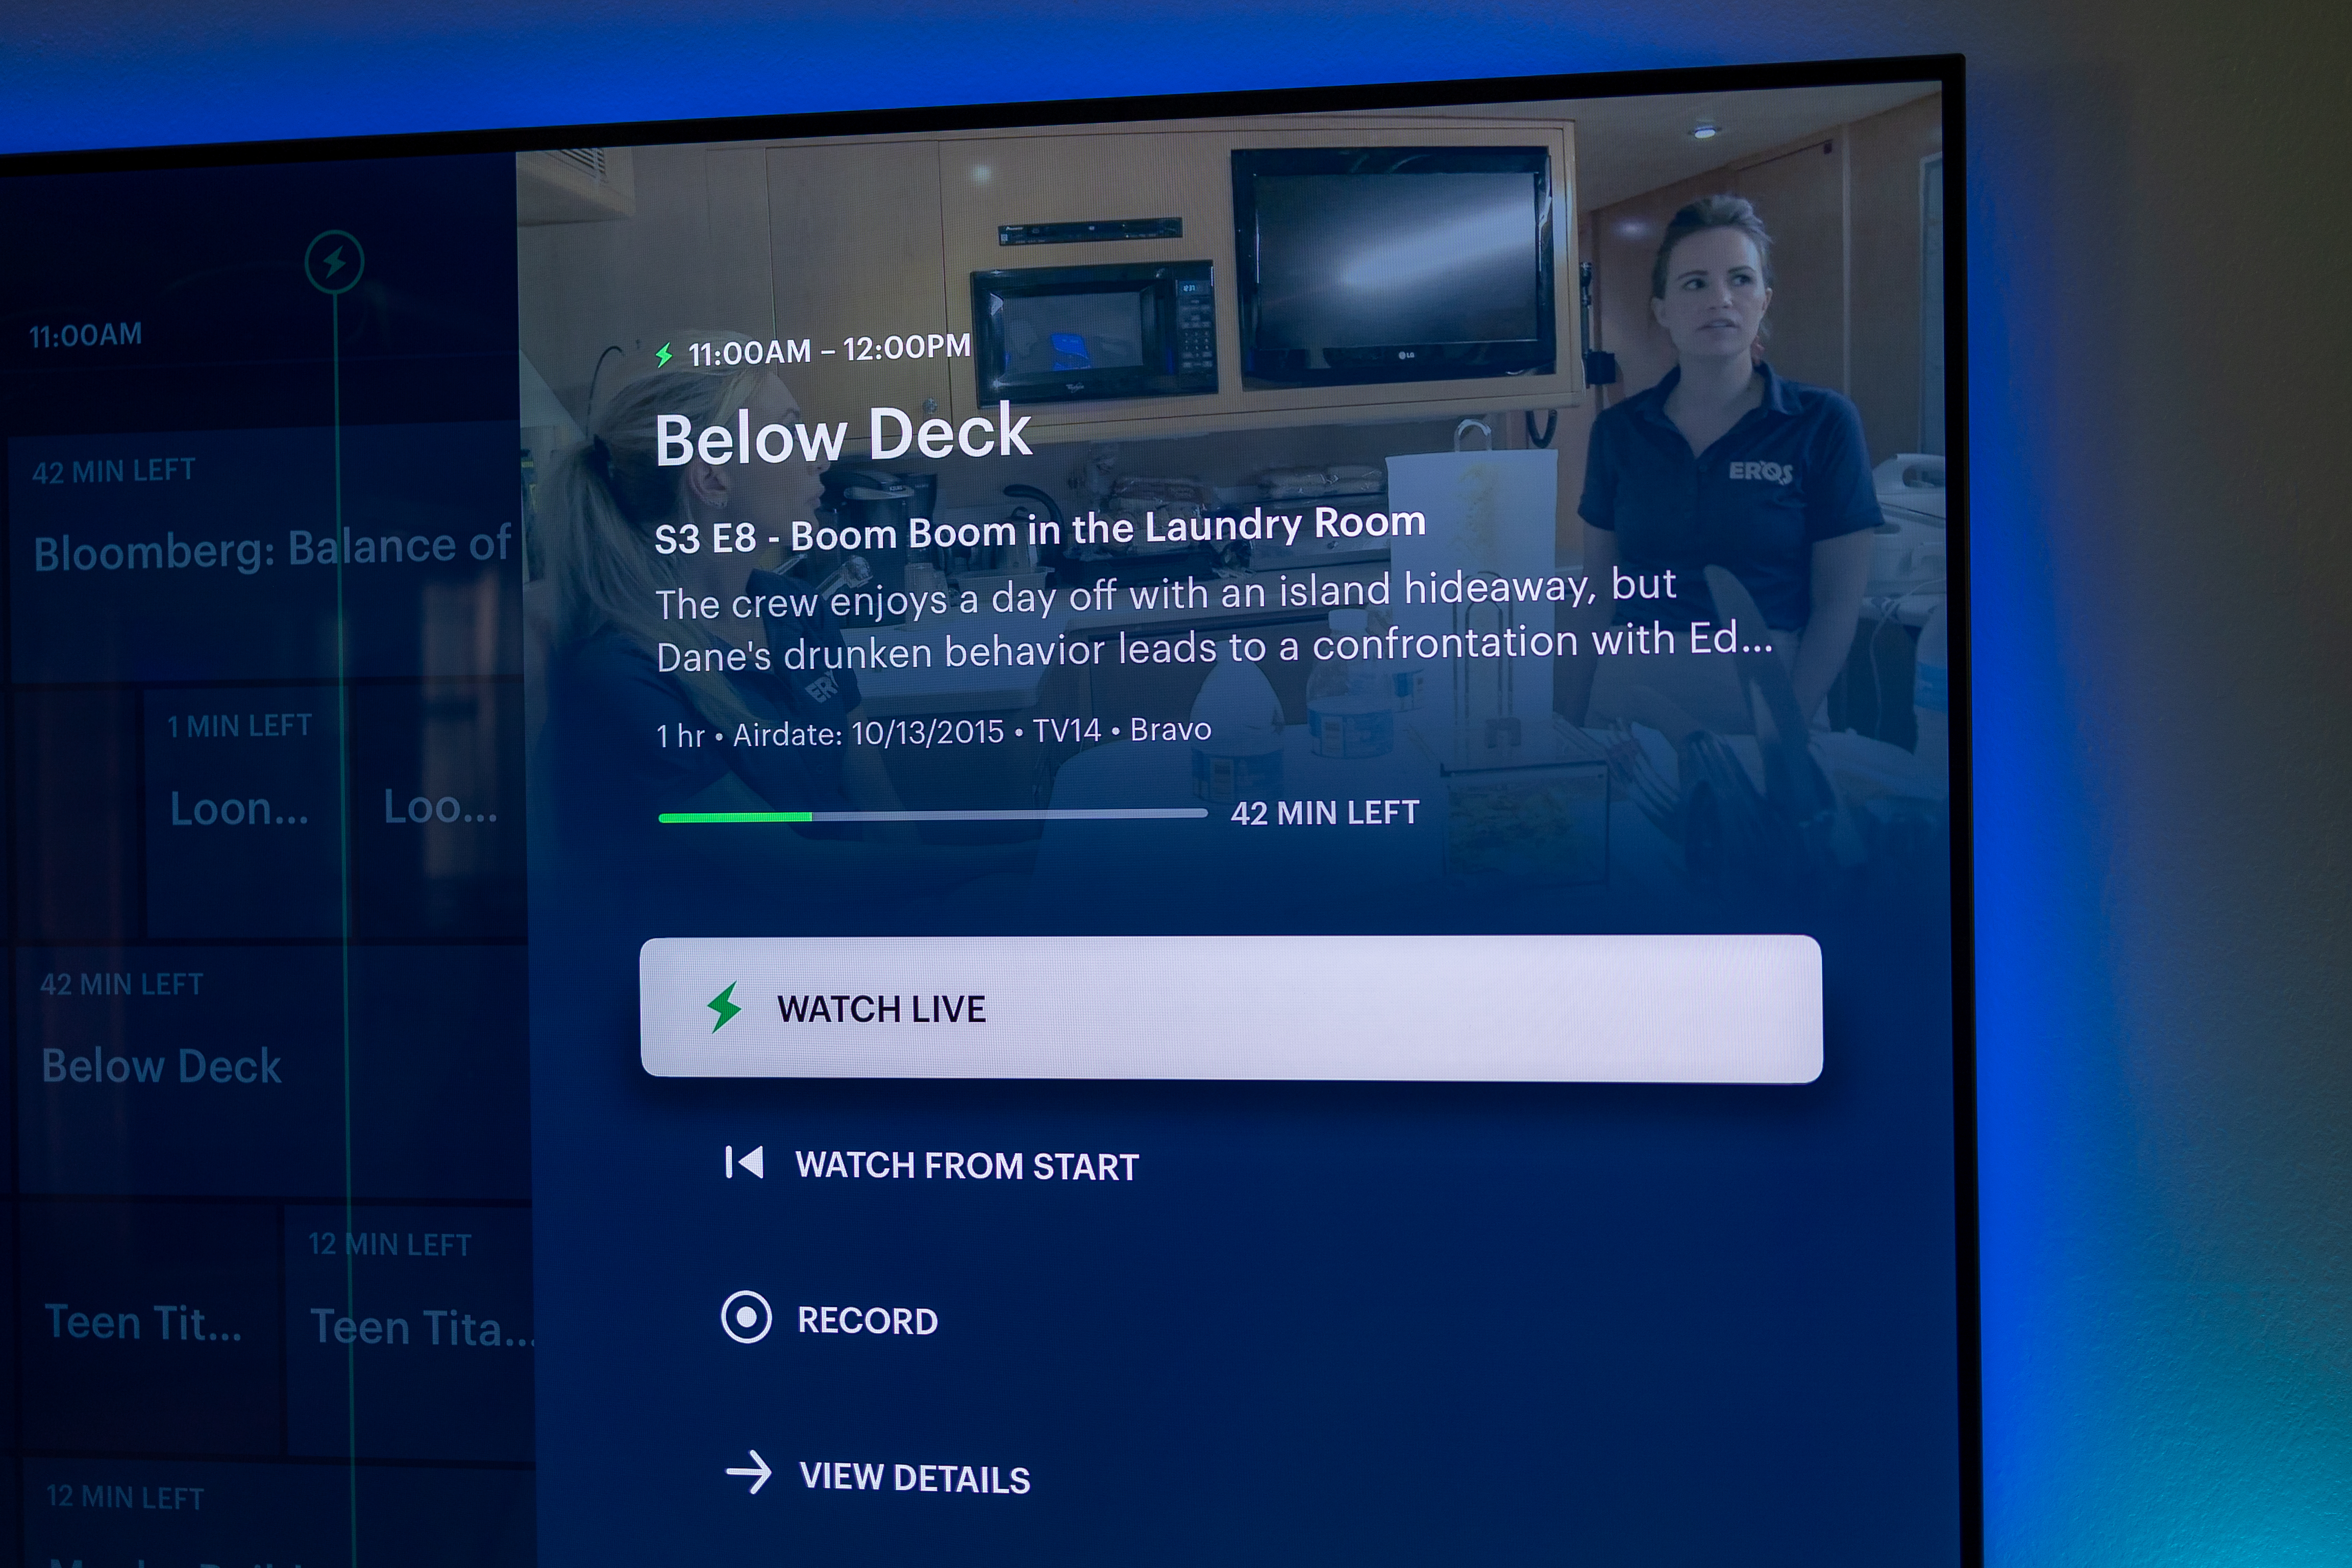 How to Watch Live TV on Hulu: Price, Plans, Features